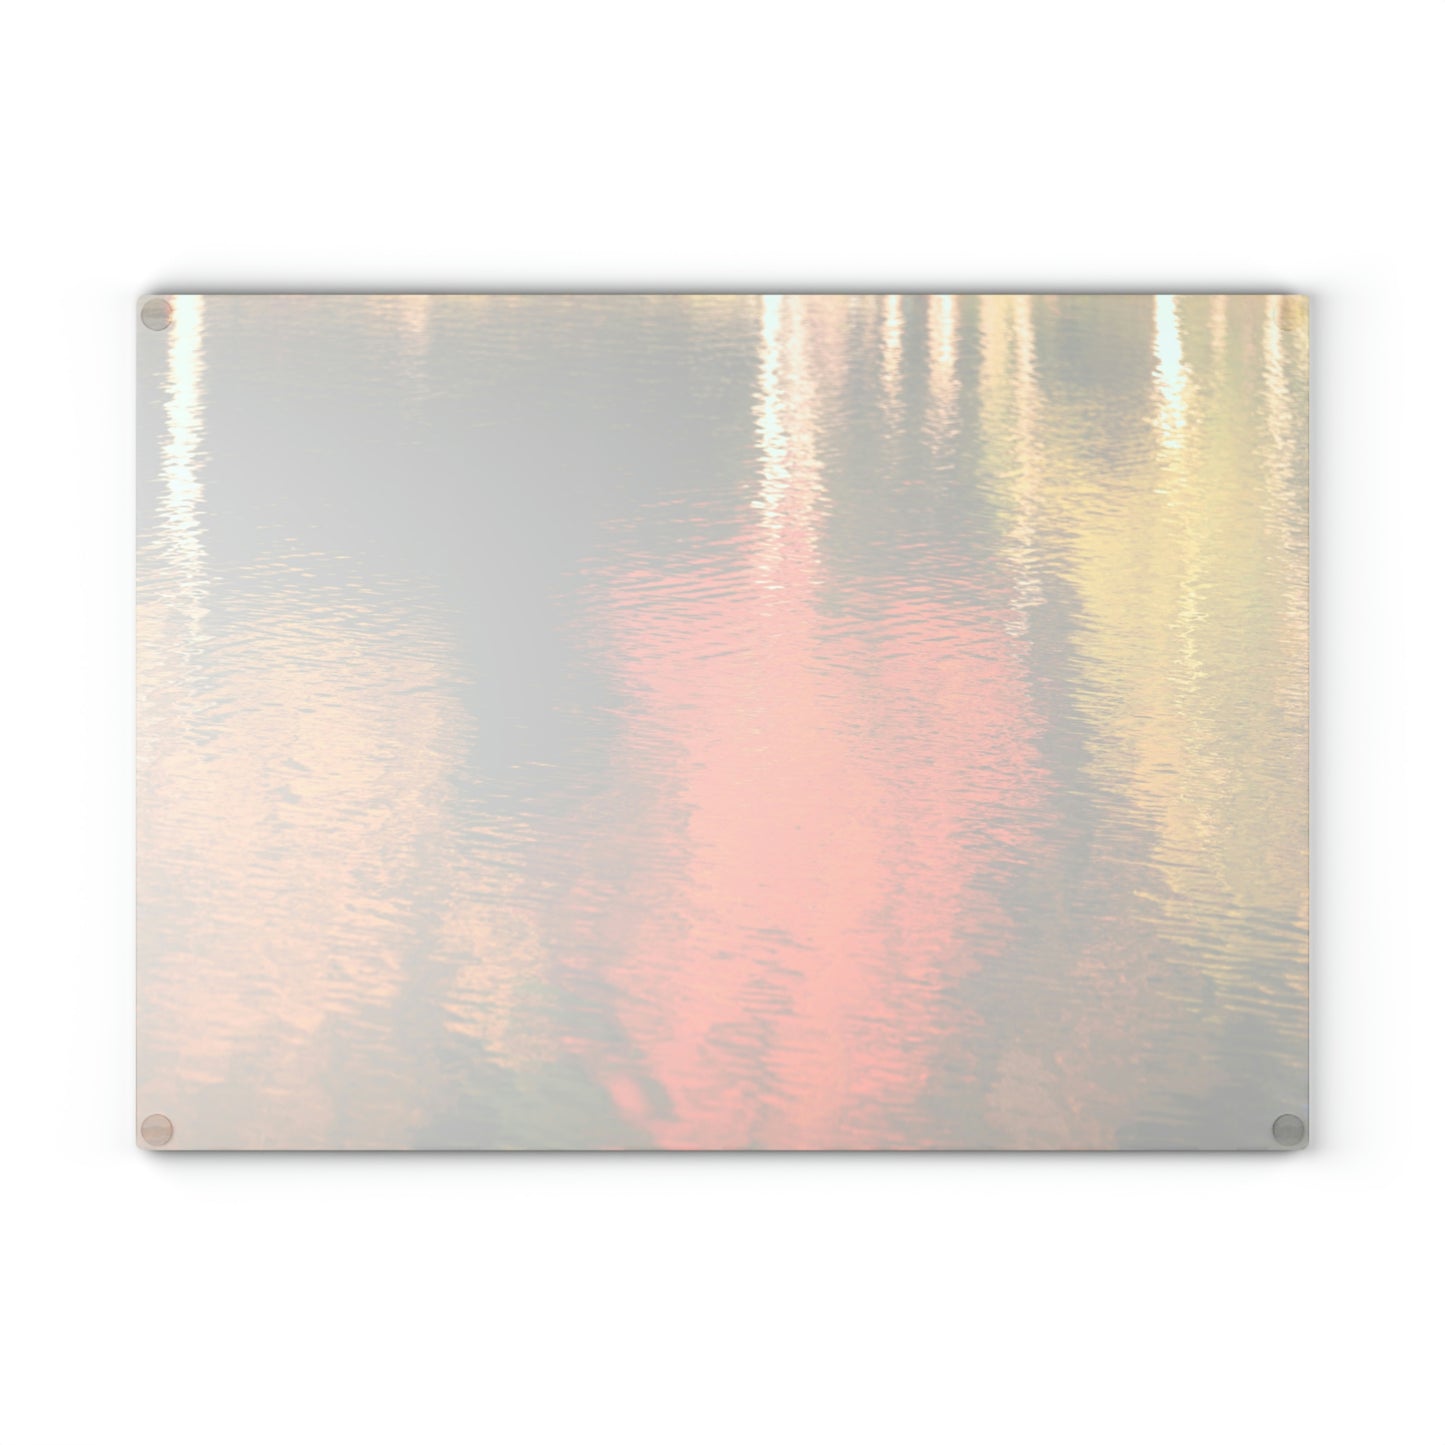 Glass Cutting Board - Reflections of Autumn